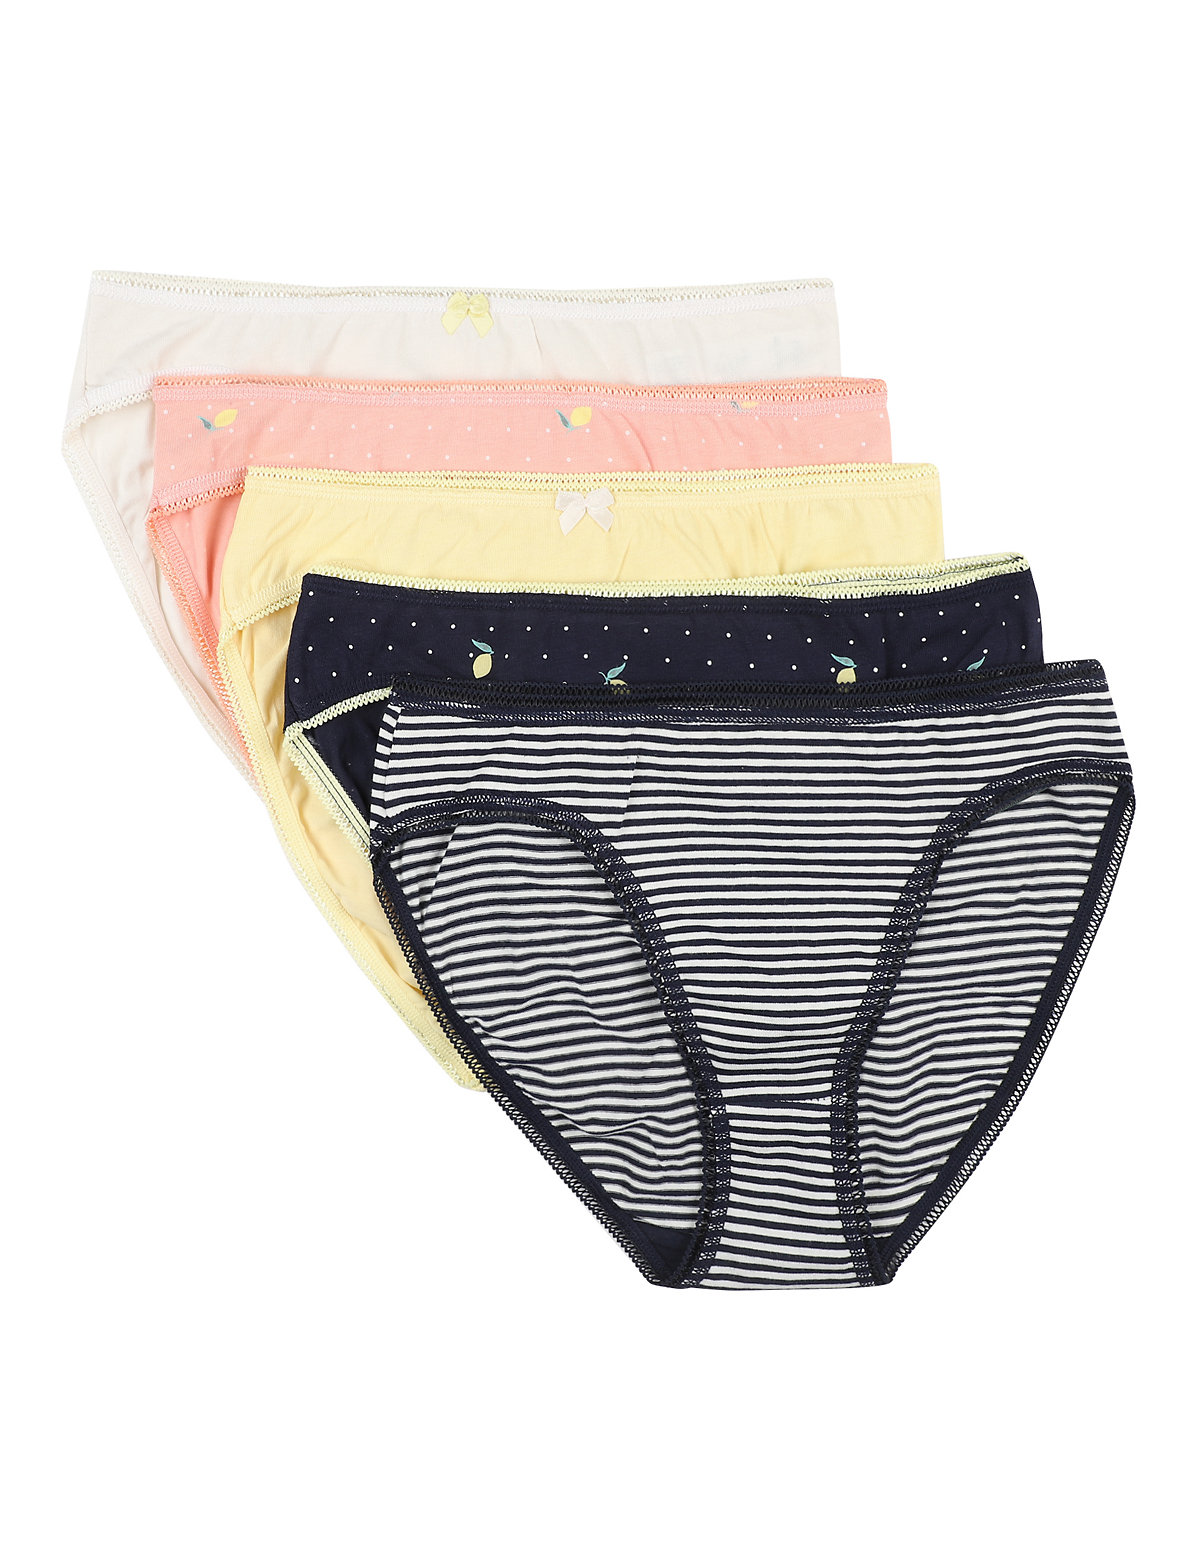 Pack of 5 Cotton Mix High Legs Knickers